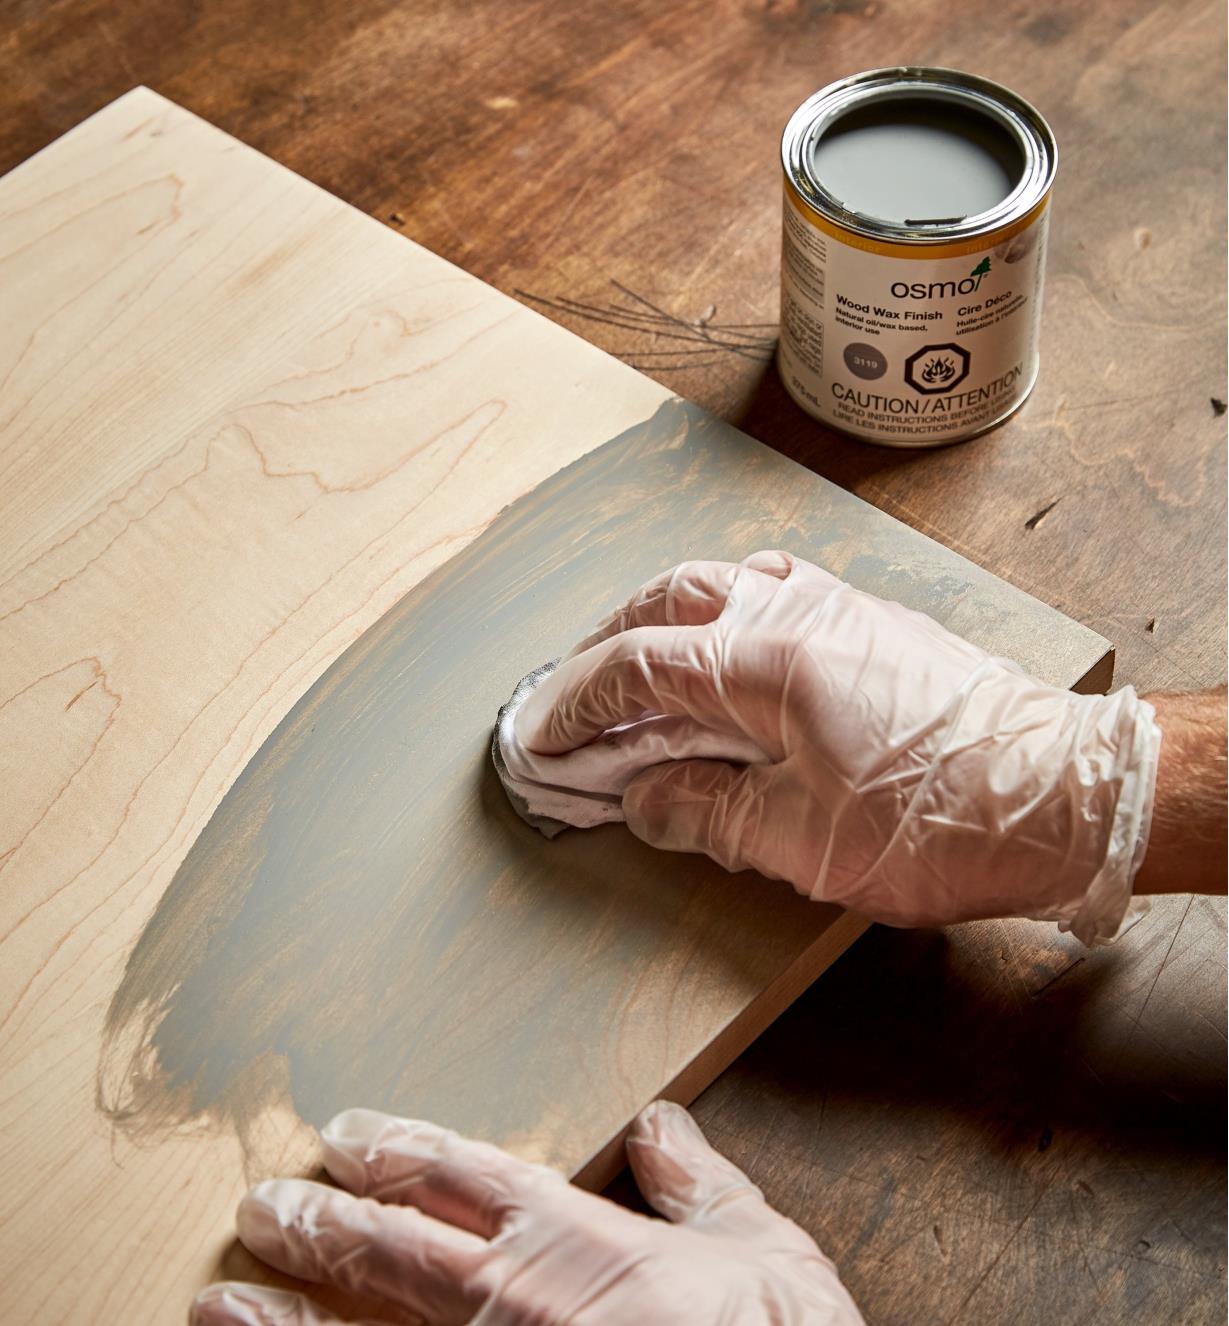 Using a cloth to apply Osmo silk gray wood wax to a wood surface